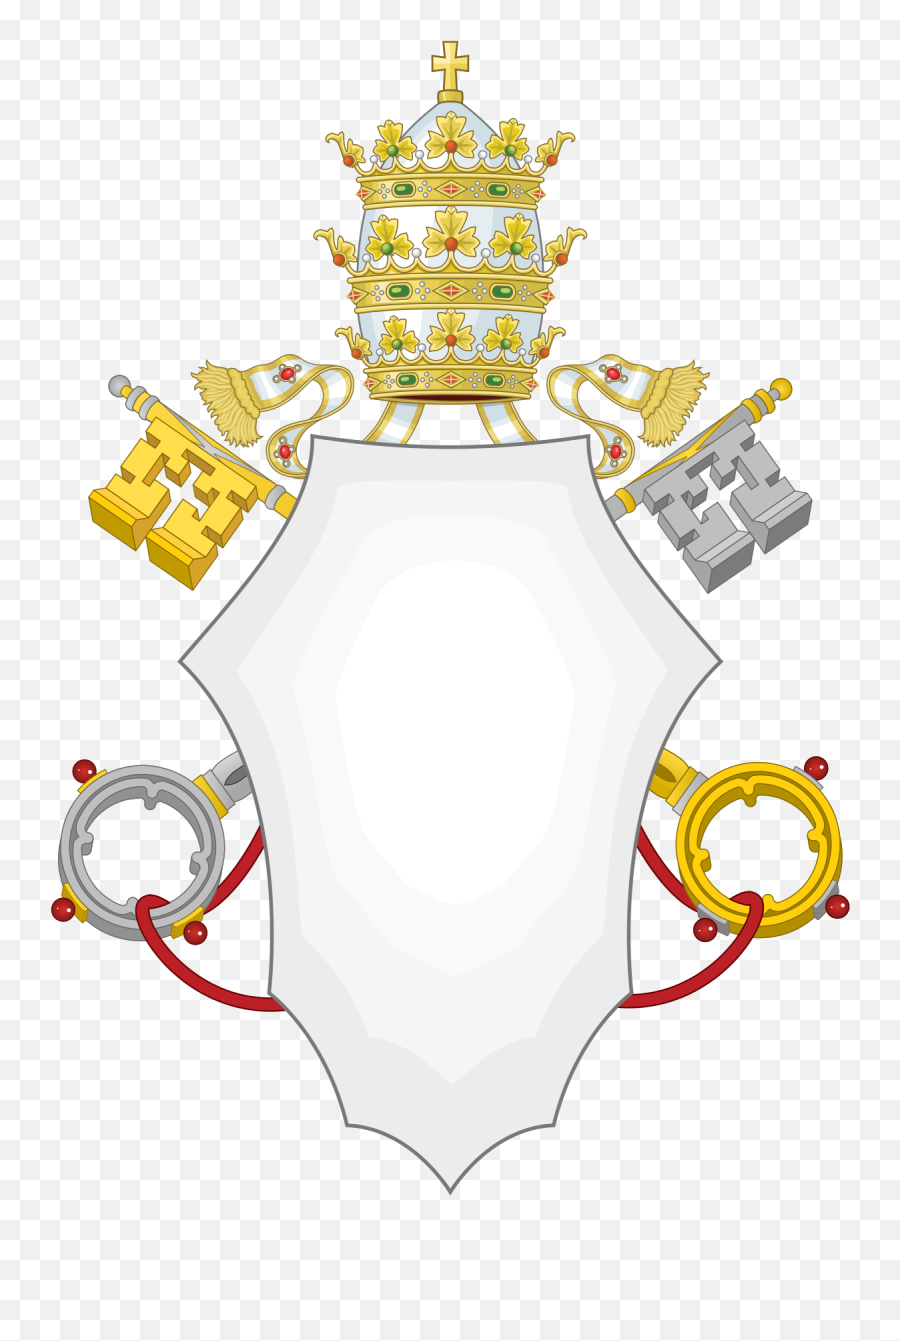 Papal Coat Of Arms Template - Pope Coat Of Arms Png,Coat Of Arms Template Png